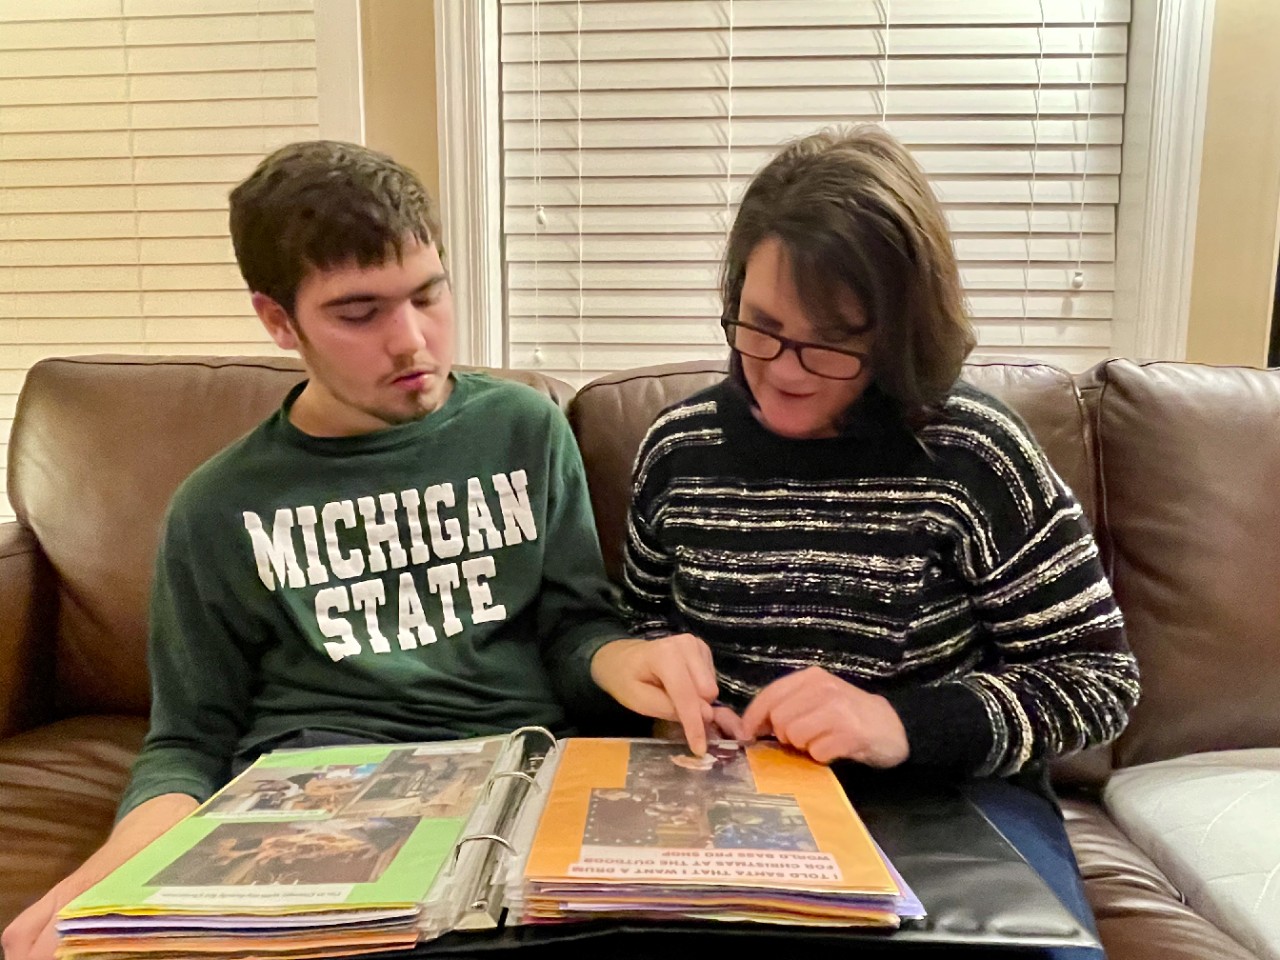 Jen is wearing a striped sweater and is seated on a brown couch next to a young man with brown hair and beard, wearing a green Michigan State shirt. He is pointing to a photo in a binder.  